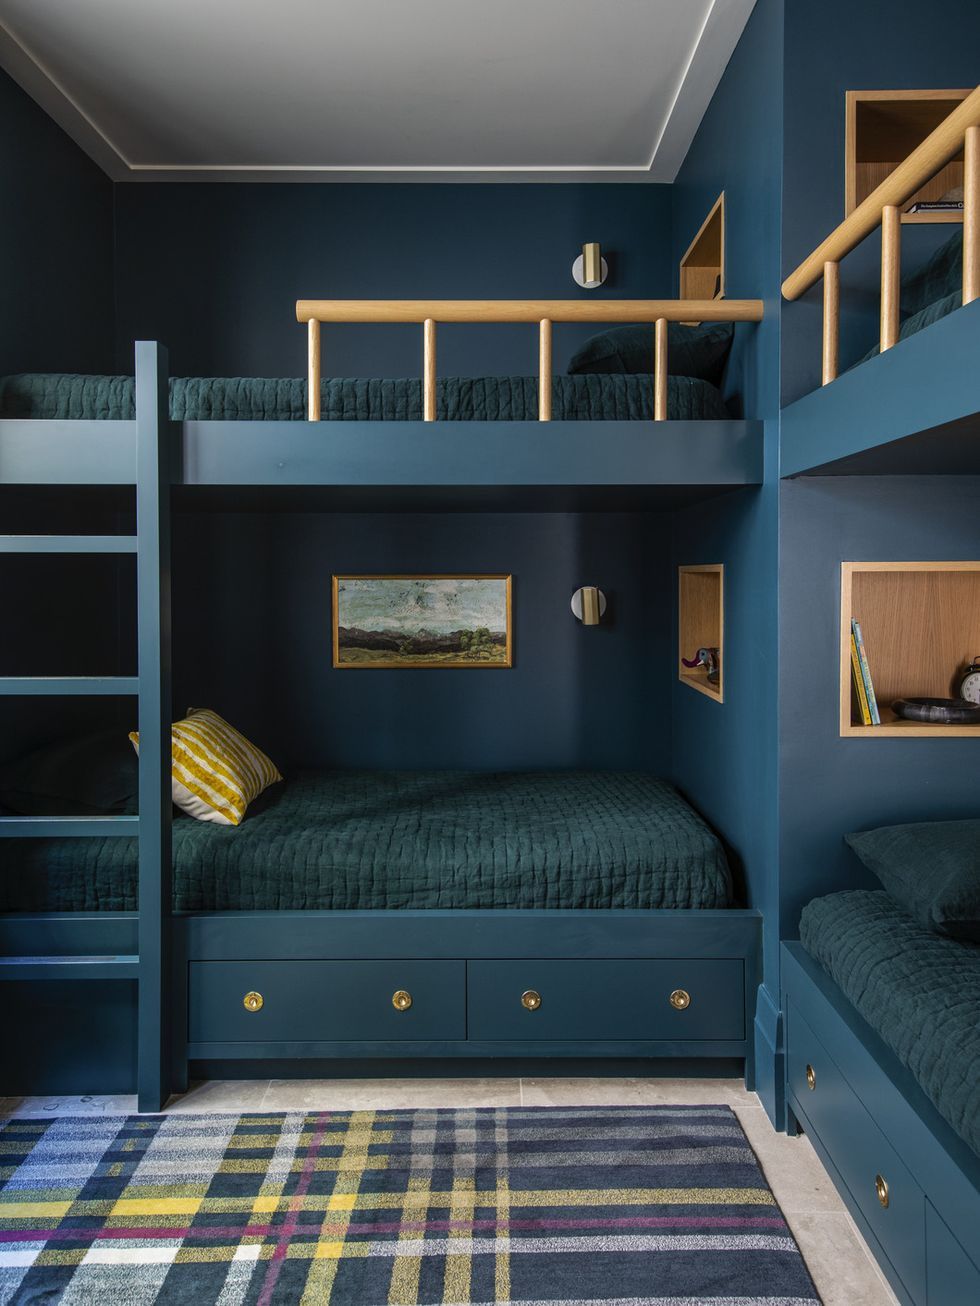 24 Super Cool Bedroom Storage Ideas That You Probably Never Considered 